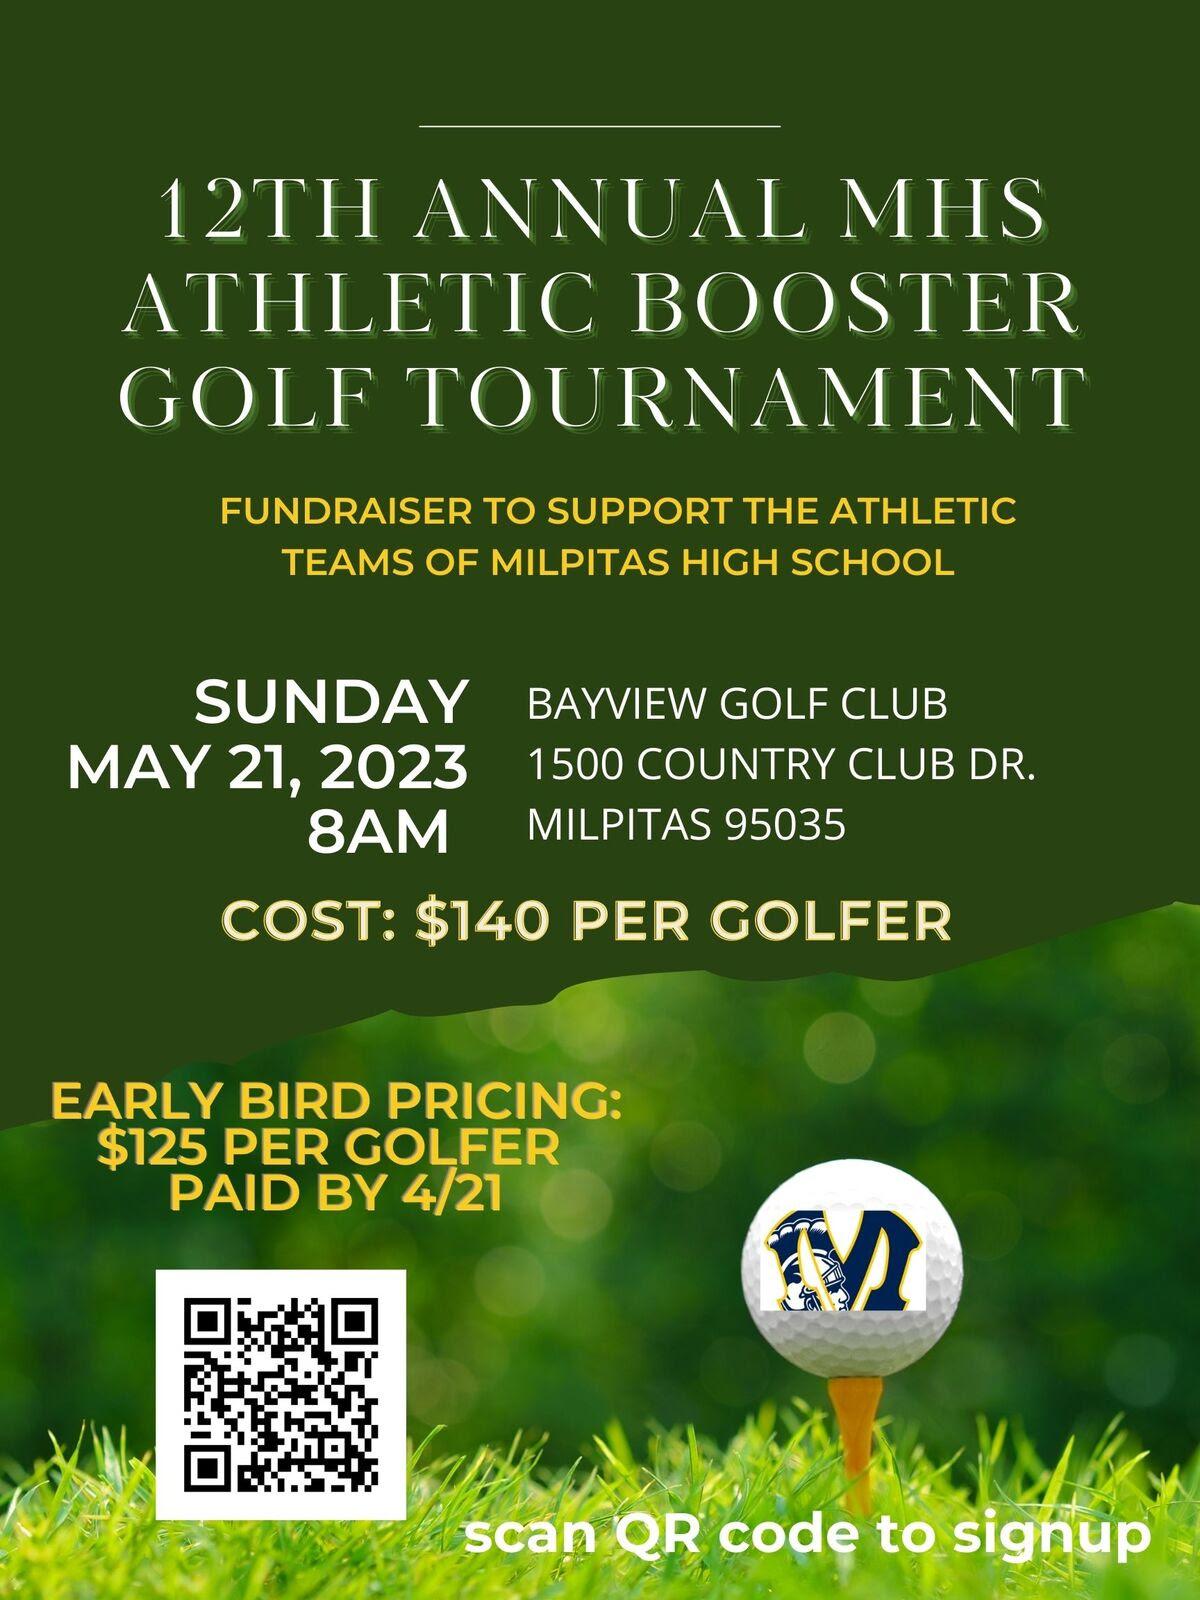 To sign-up as a sponsor or as a golfer, please scan the QR code below.